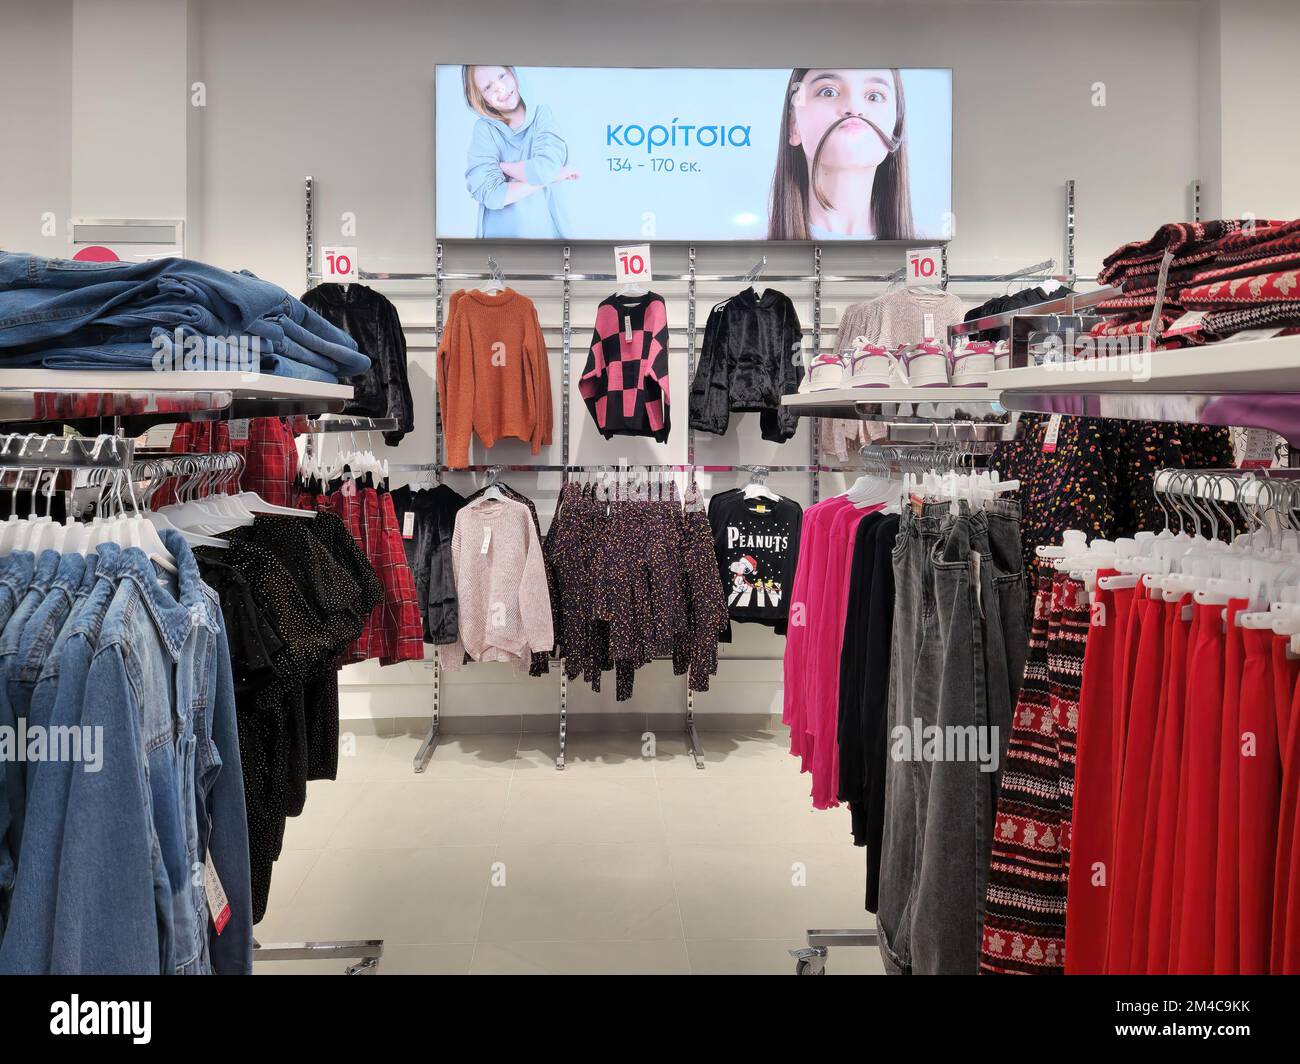 Pepco Polish international discount shop chain store interior with clothes  on sale Stock Photo - Alamy